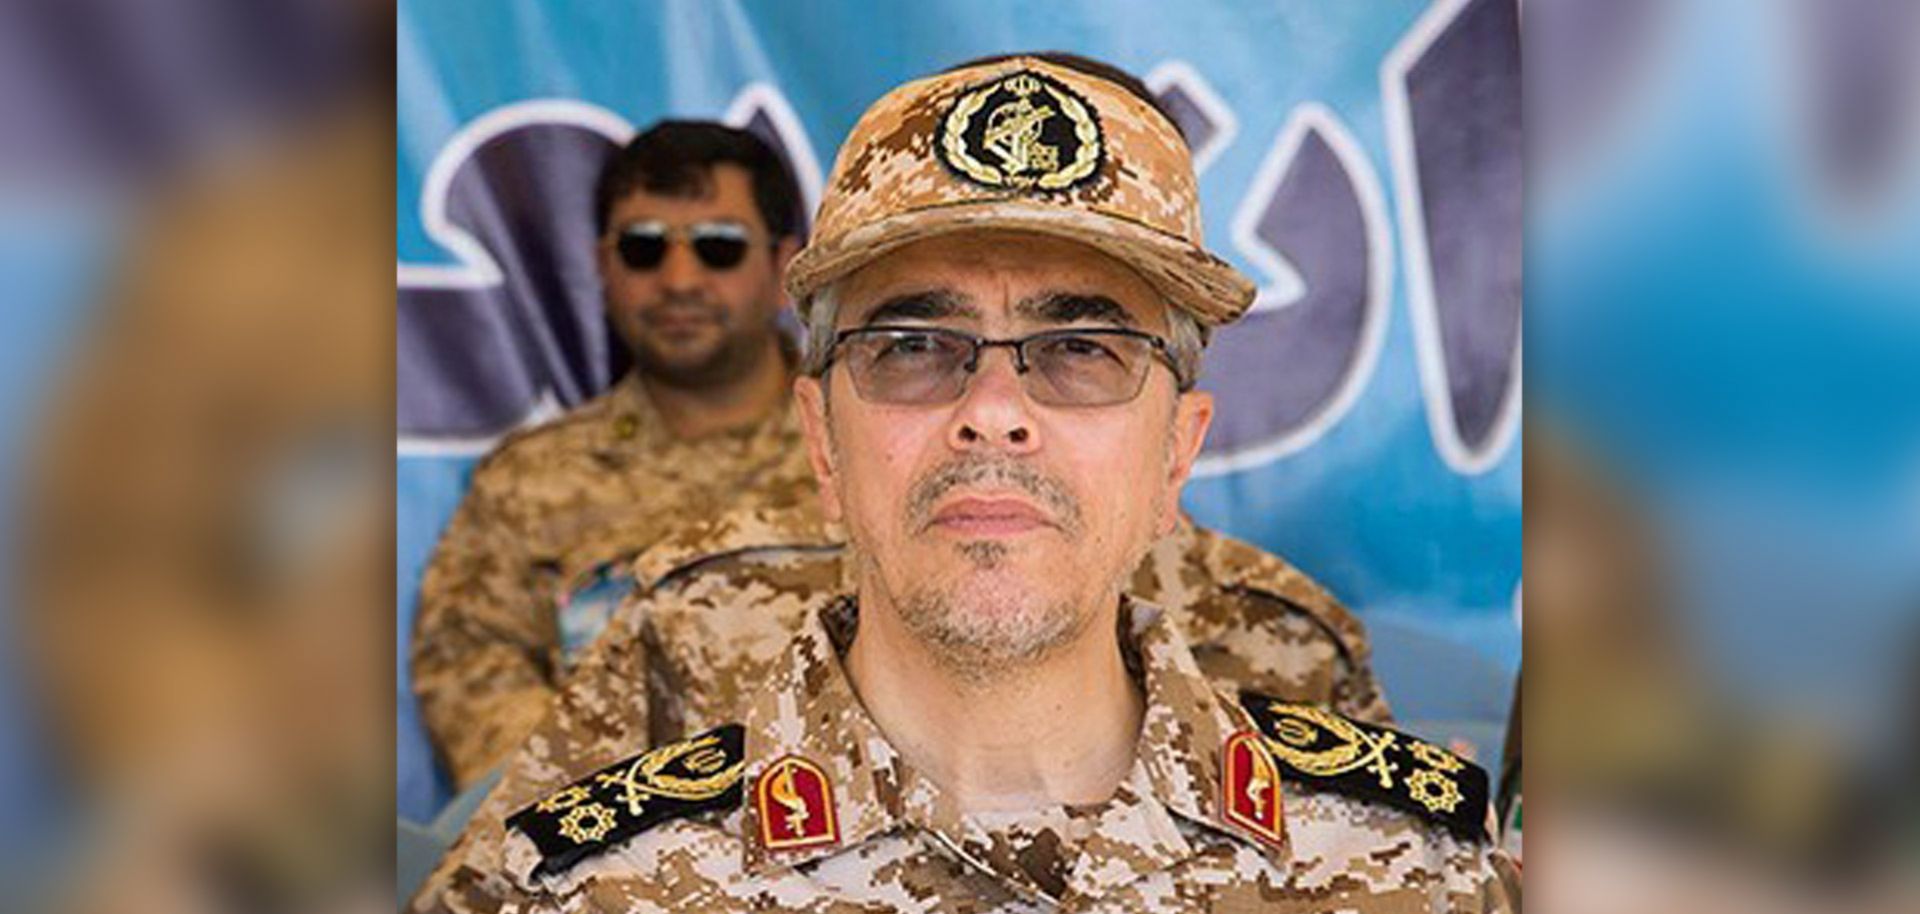 A New Military Chief Rises in Iran